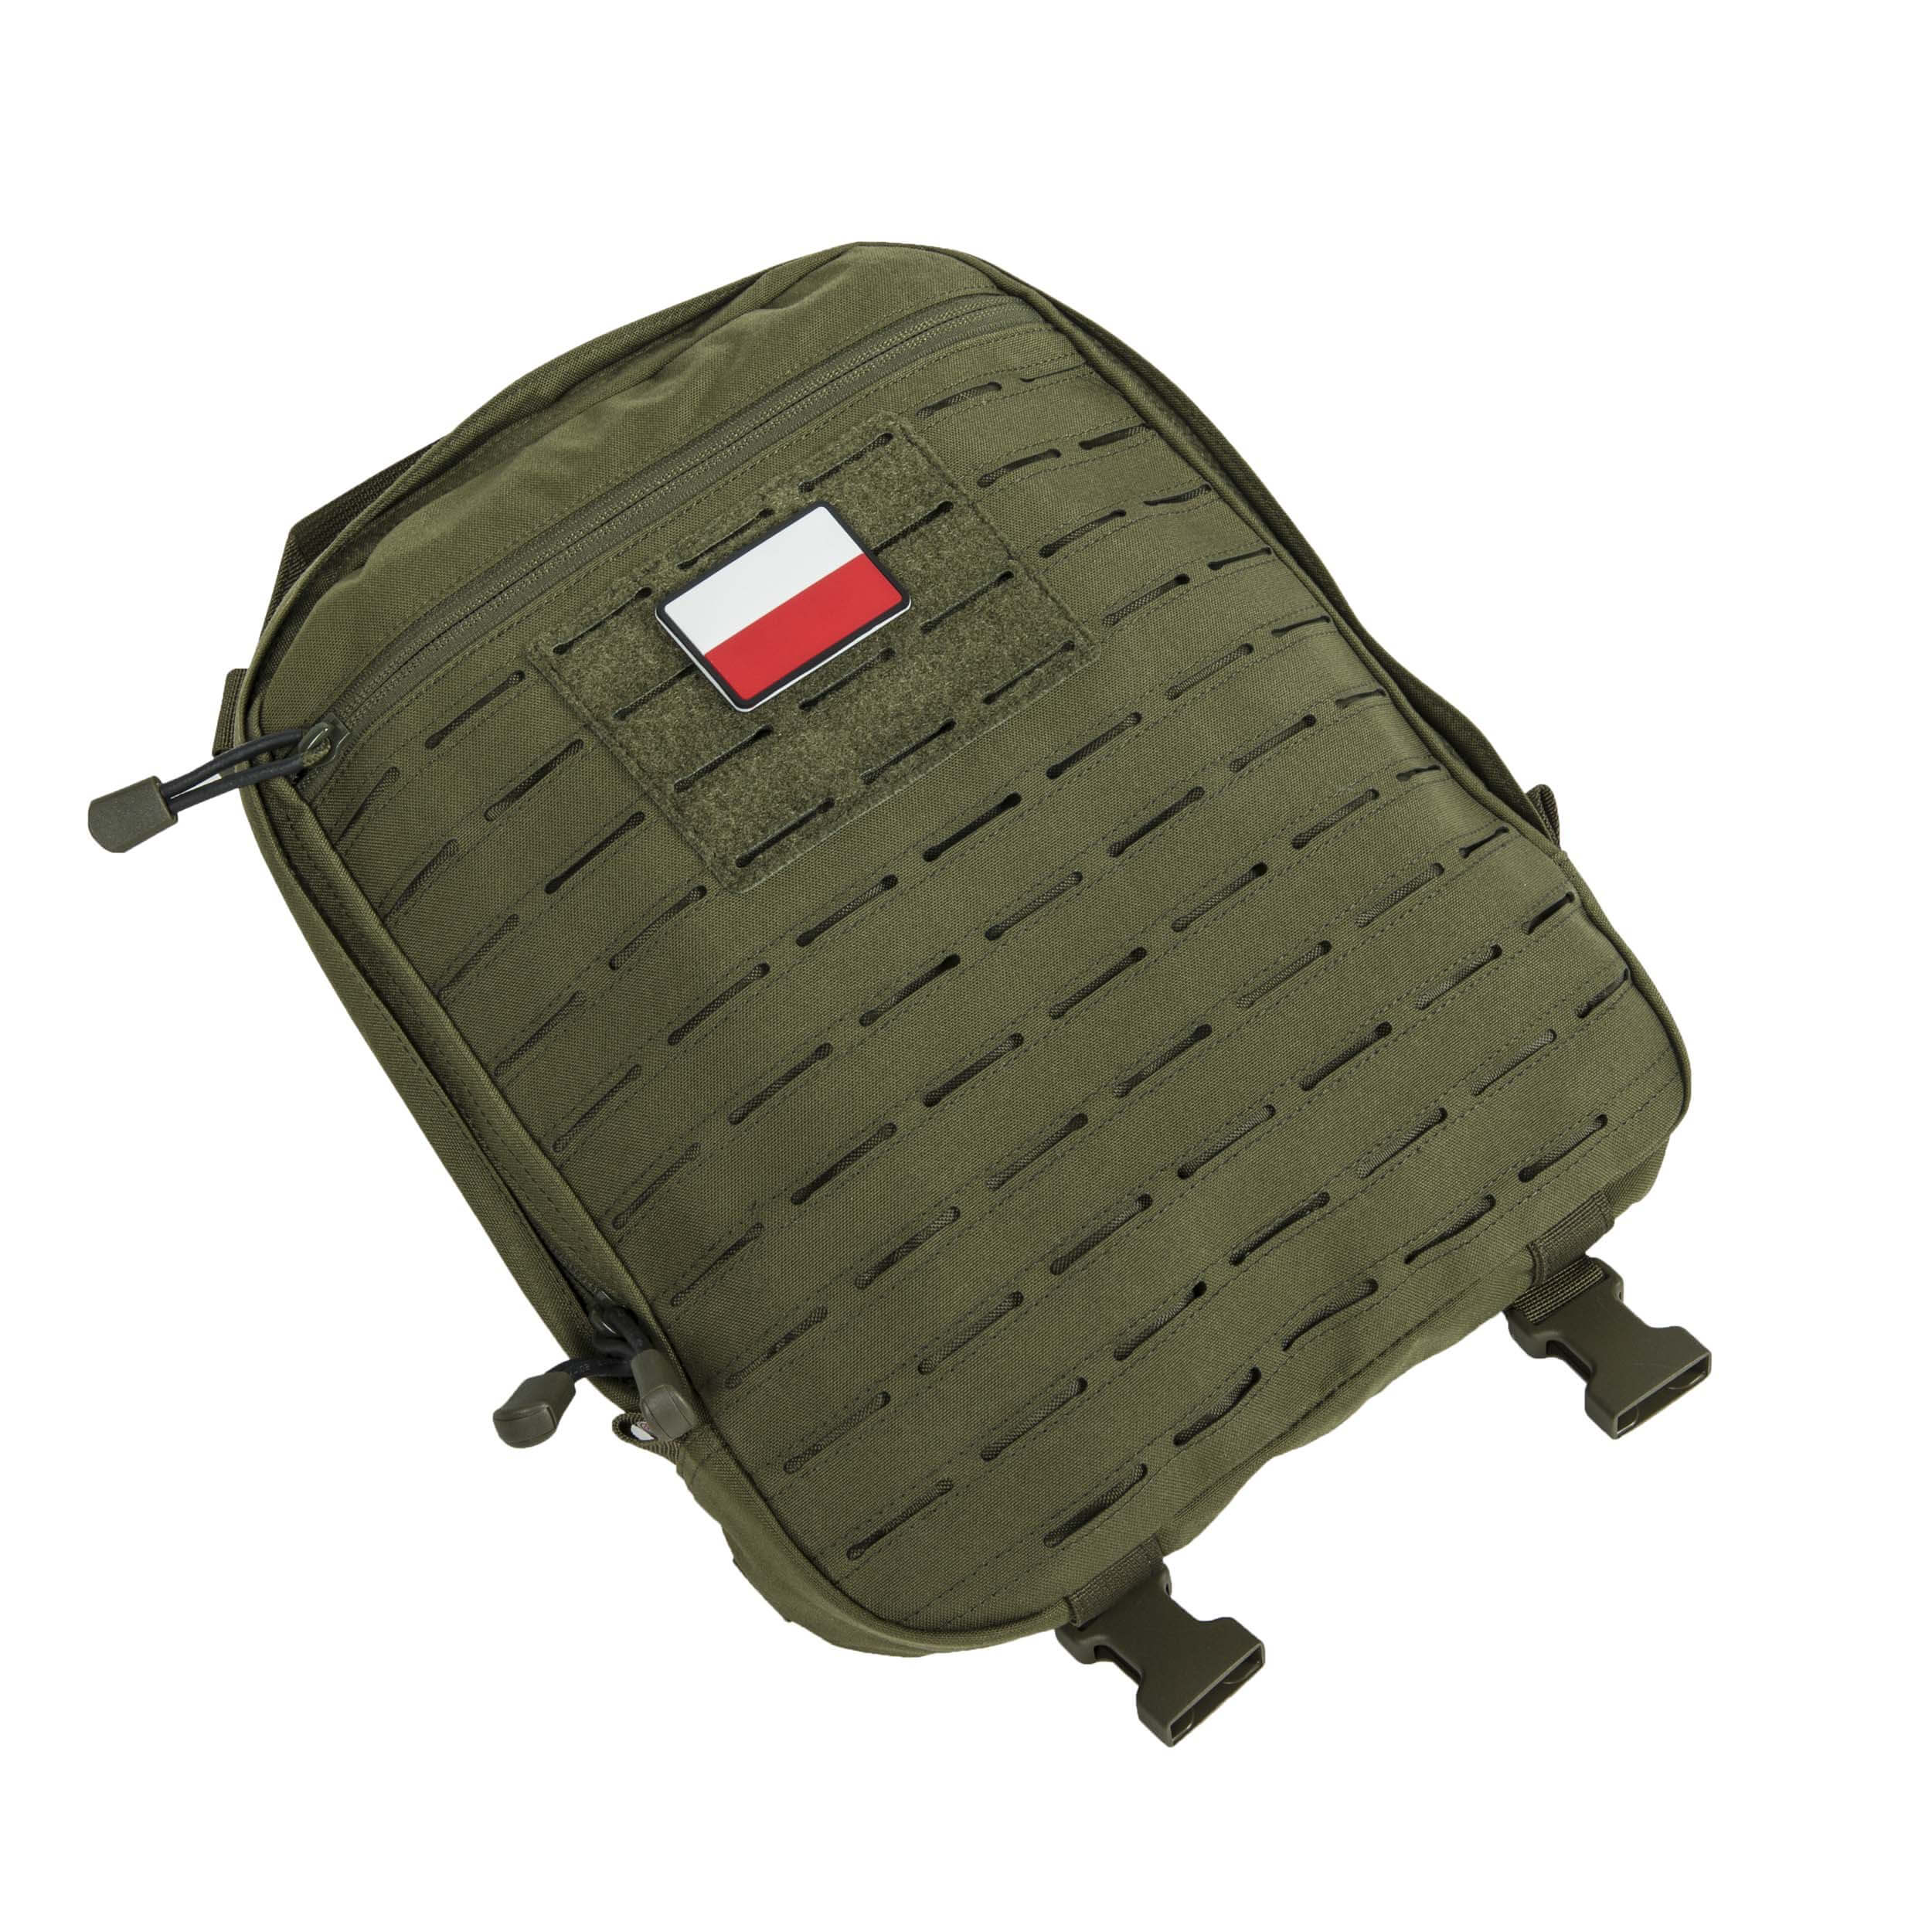 Direct Action GHOST® MkII Backpack - Cordura® - Olive Green